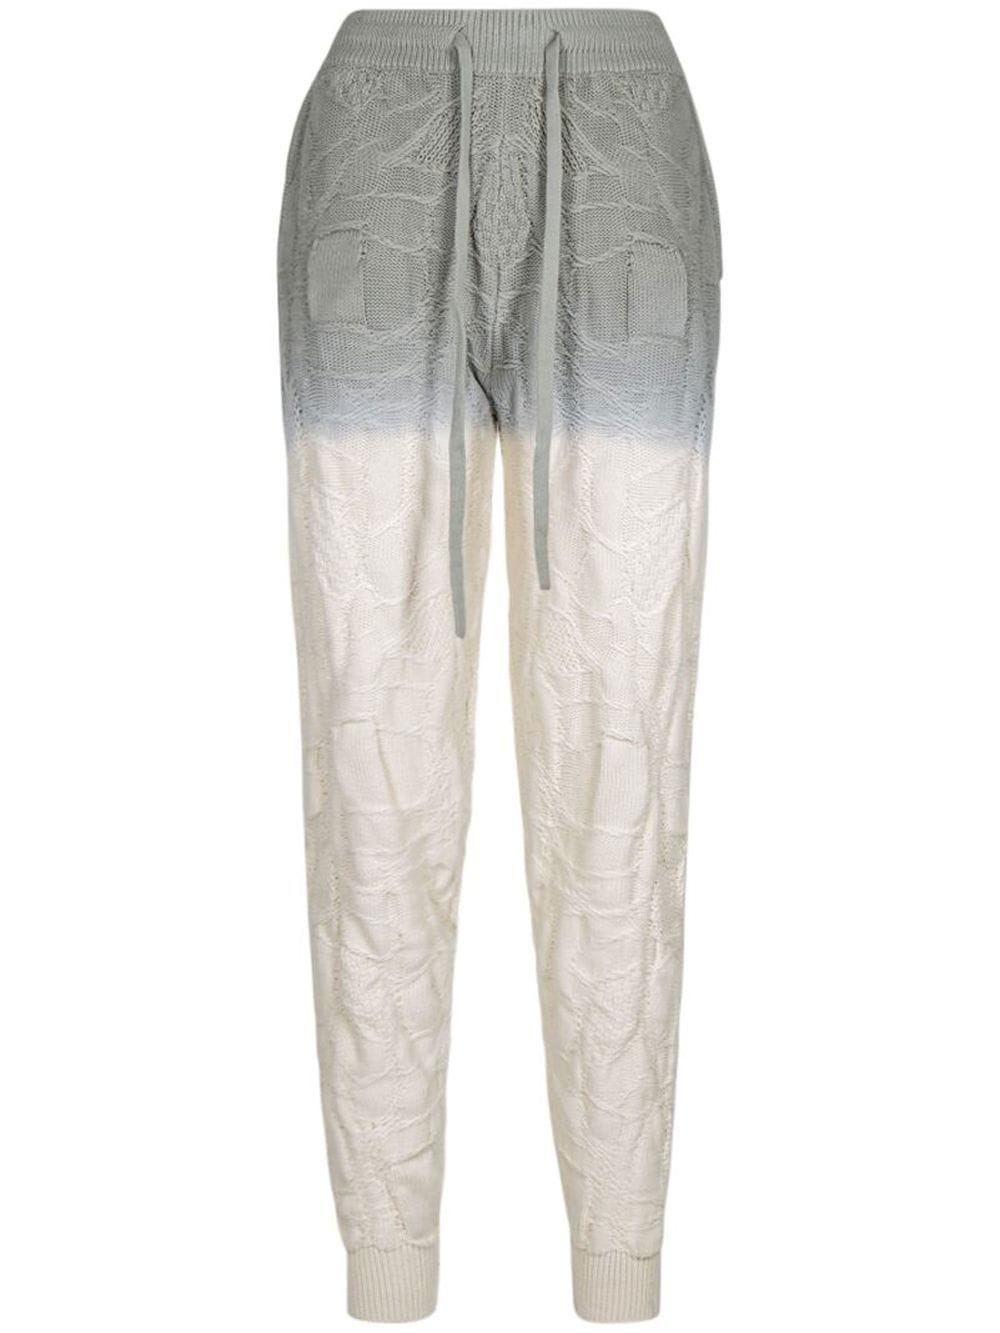 Crossover Netting gradient track pants